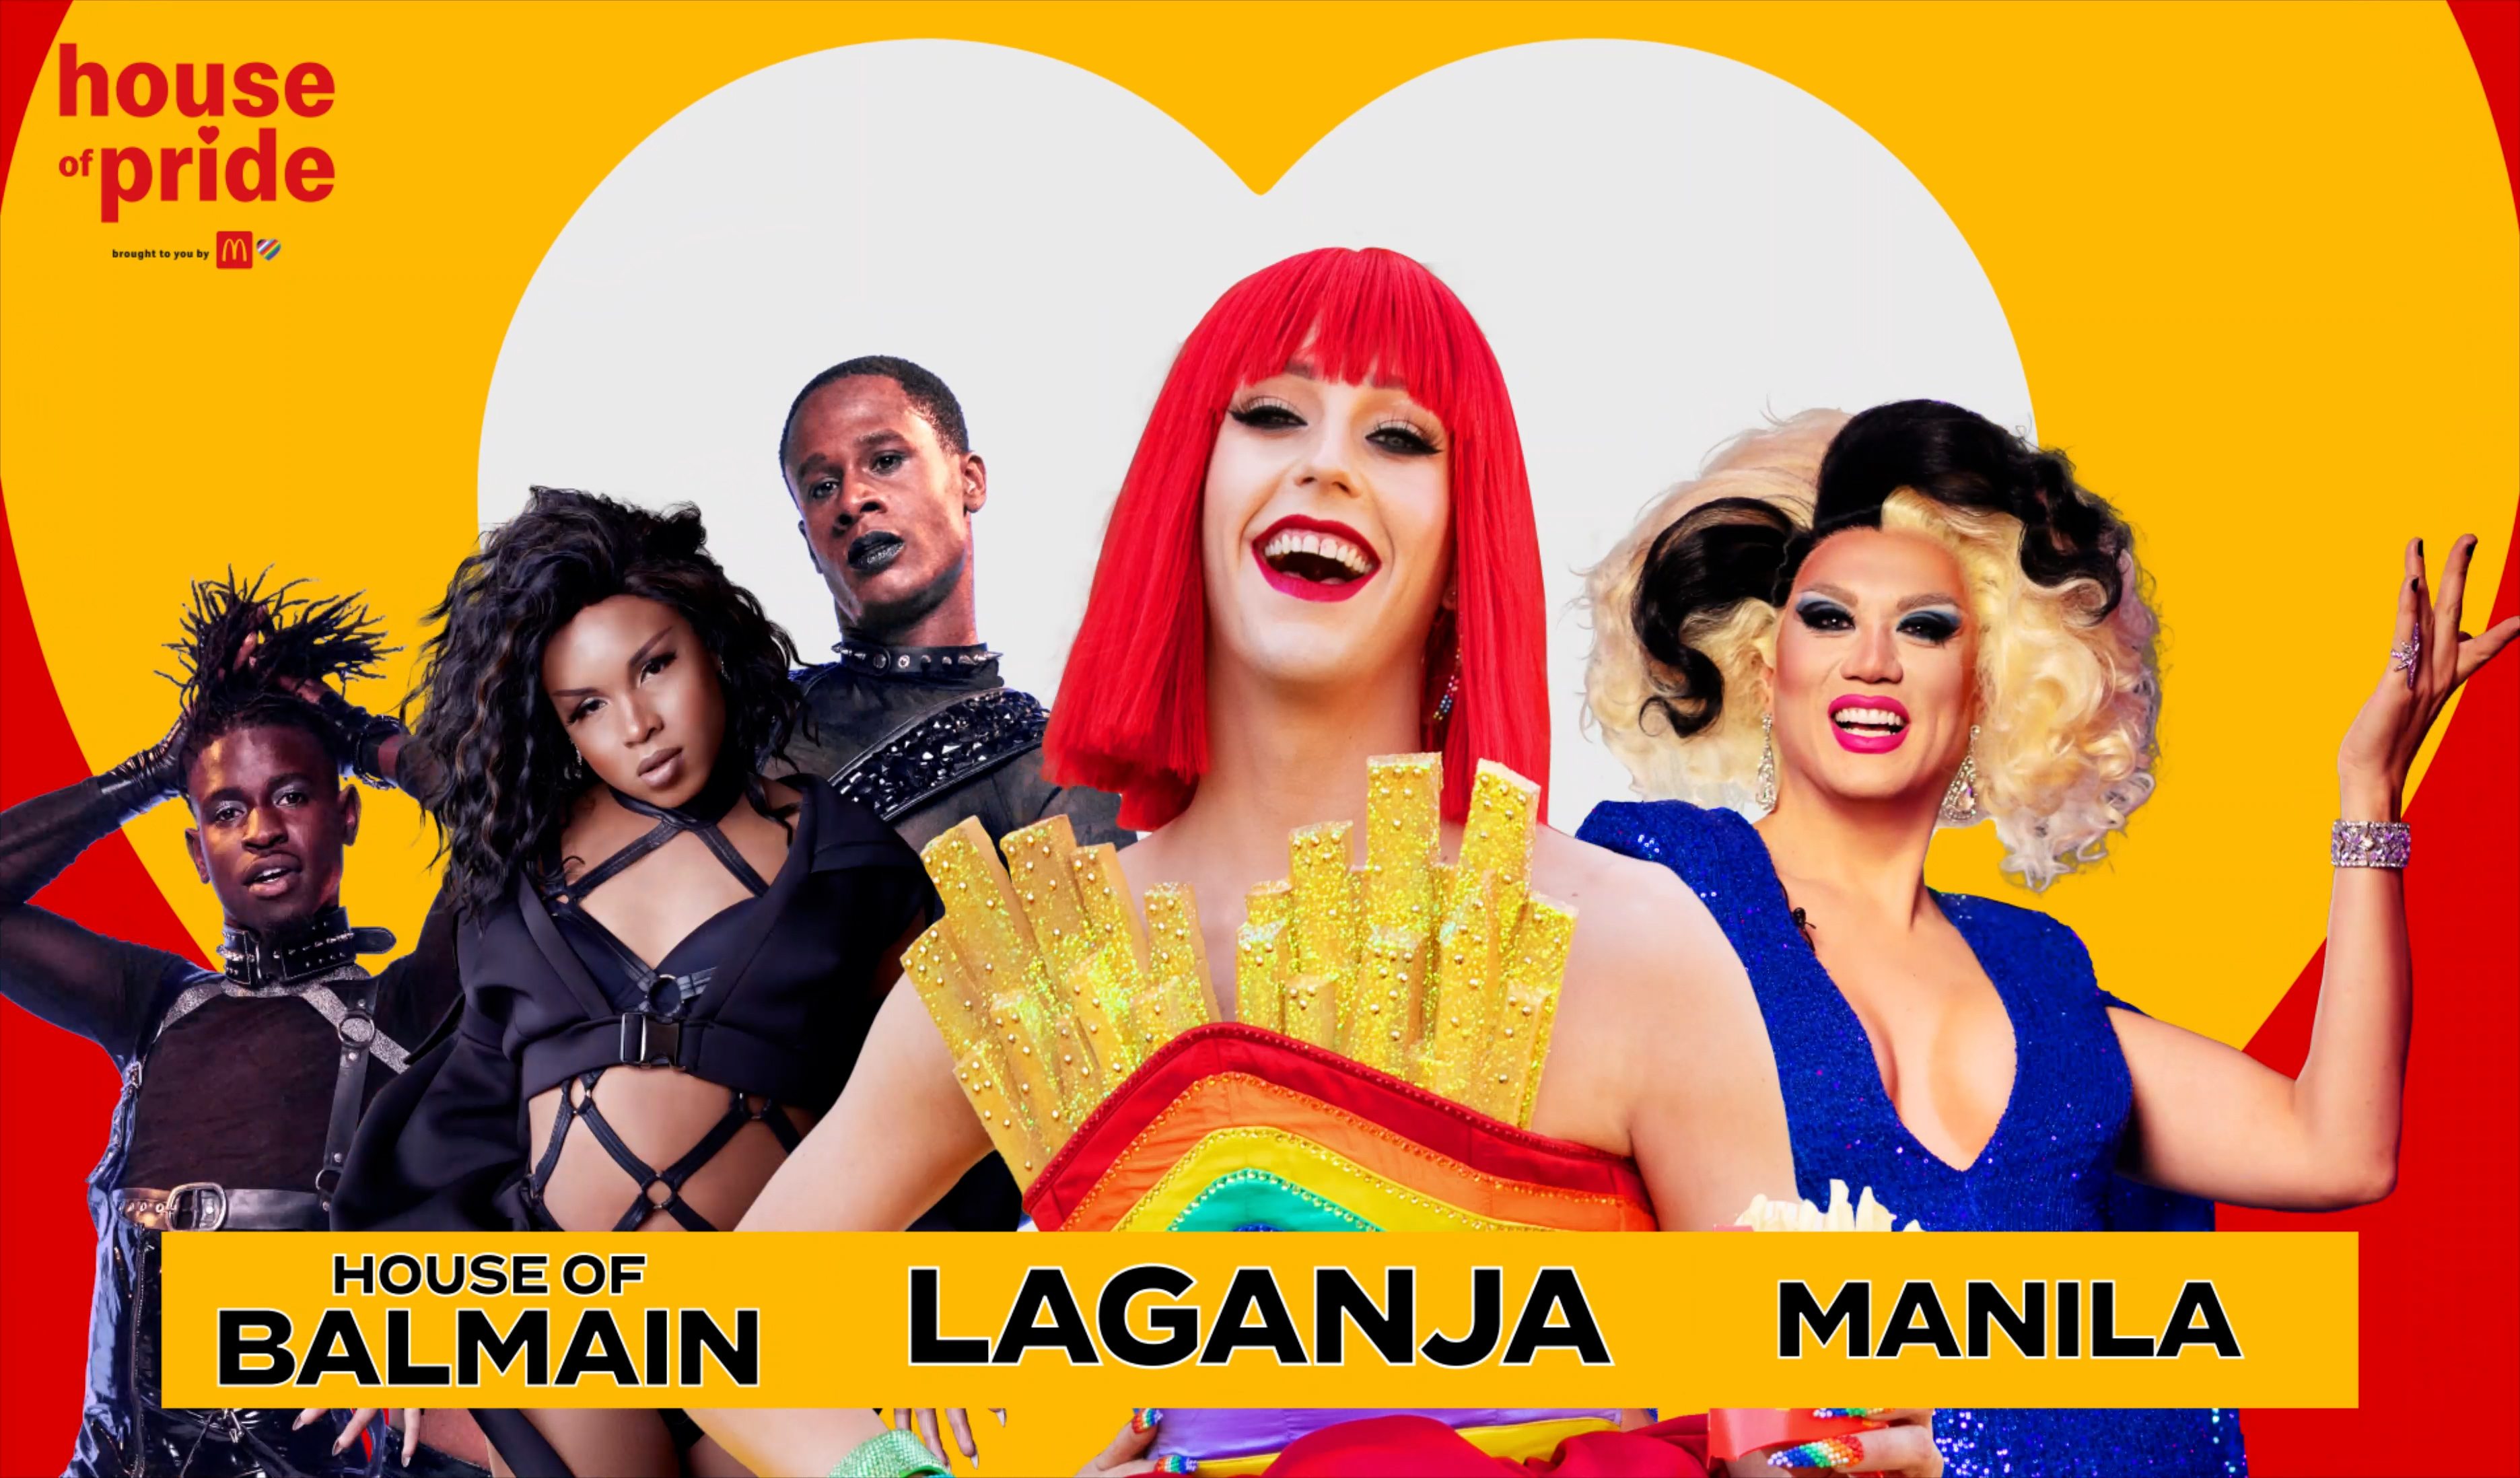 Performances from HBO Max’s Legendary winners, the House of Balmain; RuPaul’s Drag Race alum Laganja Estranja; and hosted by Manila Luzon